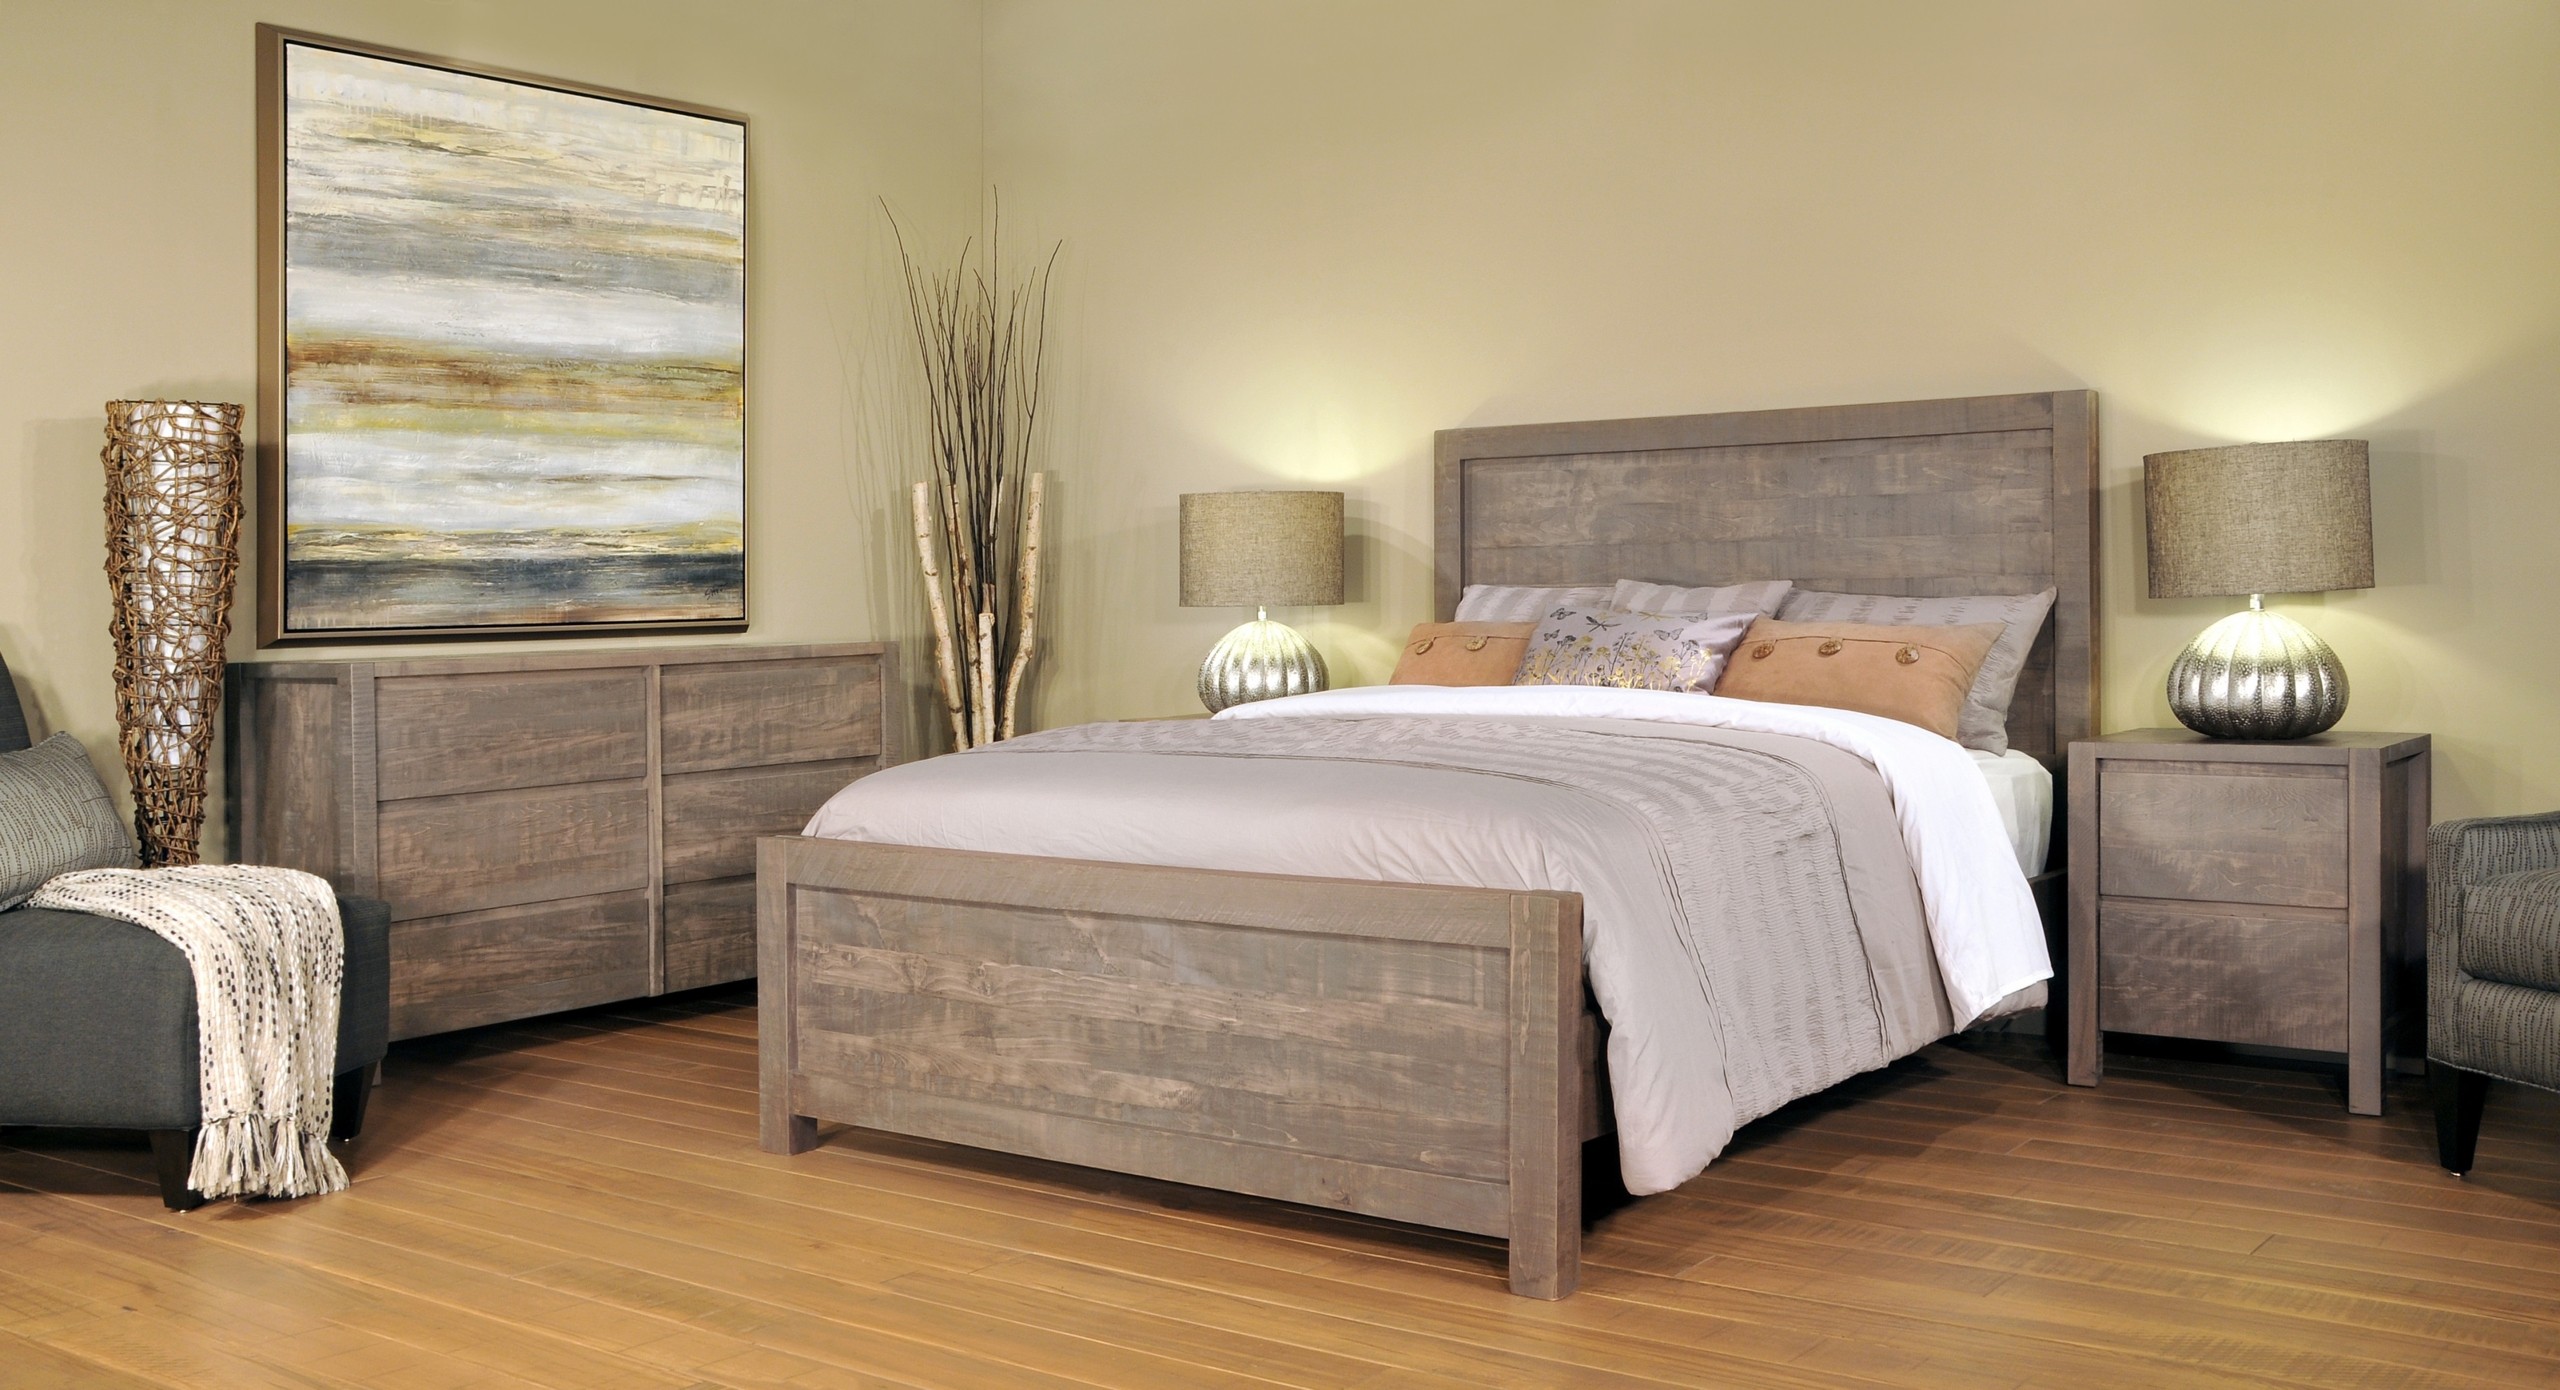 Awesome distressed wood bedroom set gallery home design